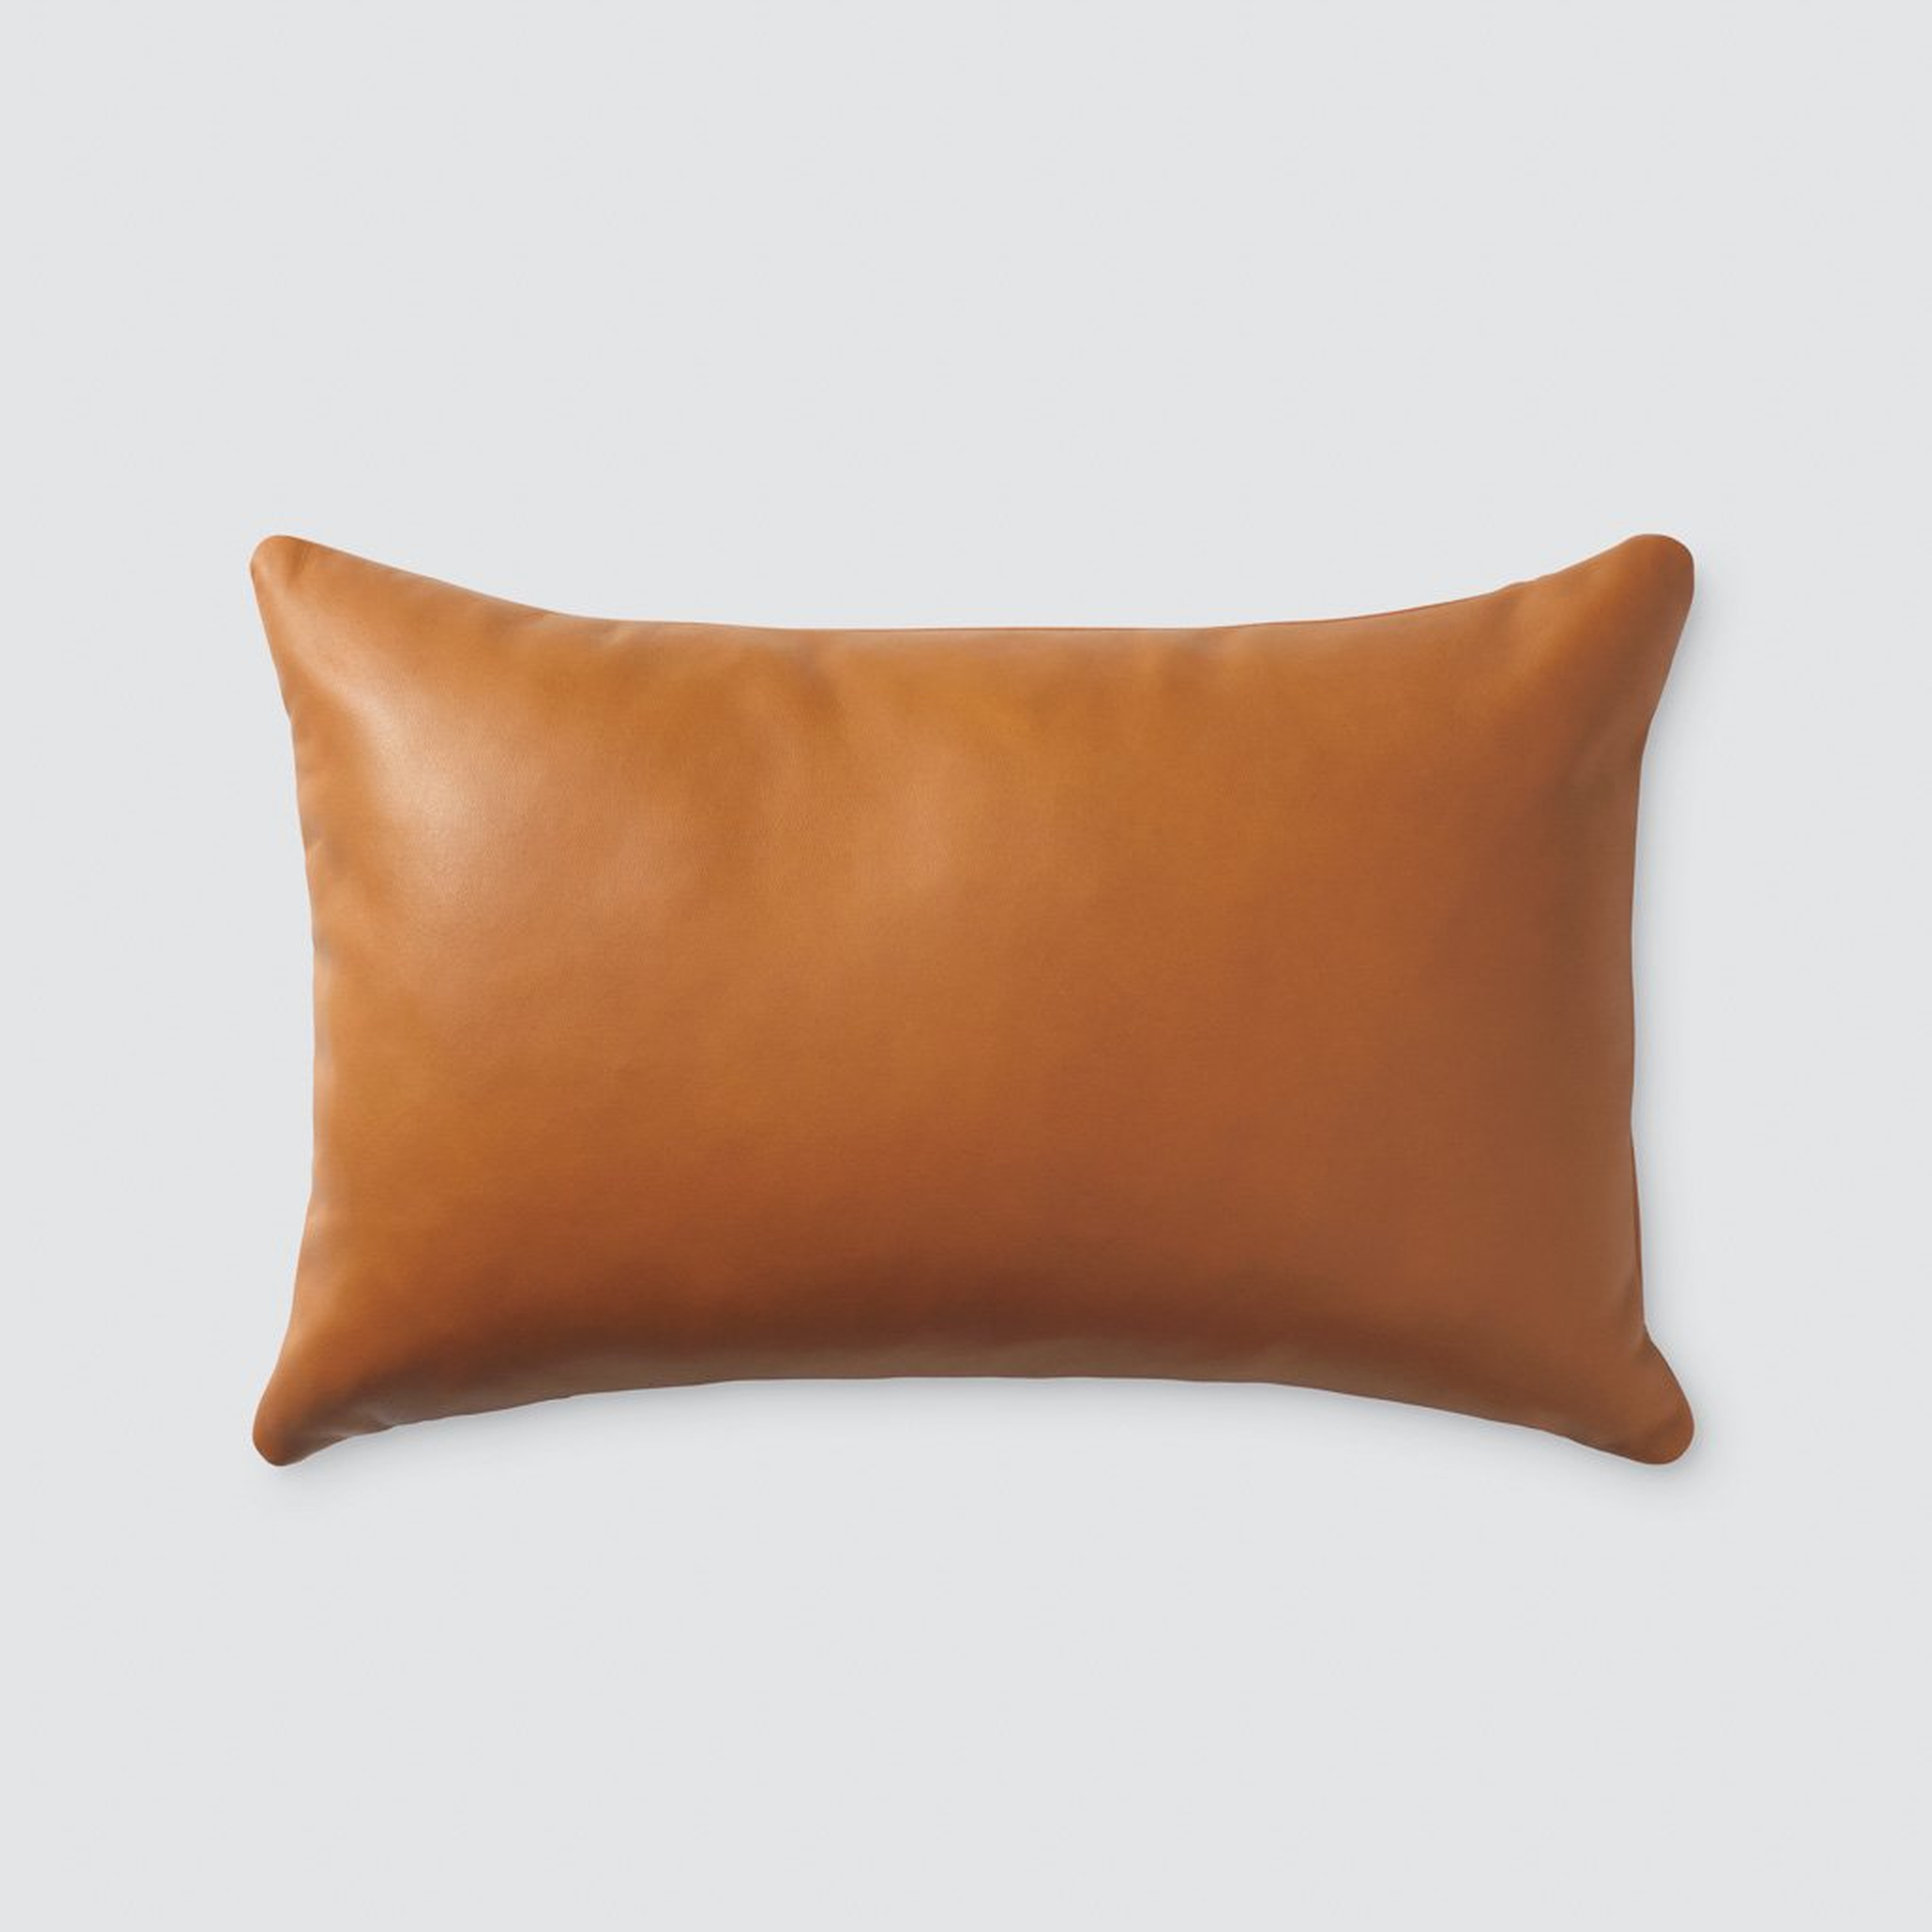 Torres Leather Lumbar Pillow - Caramel By The Citizenry - The Citizenry